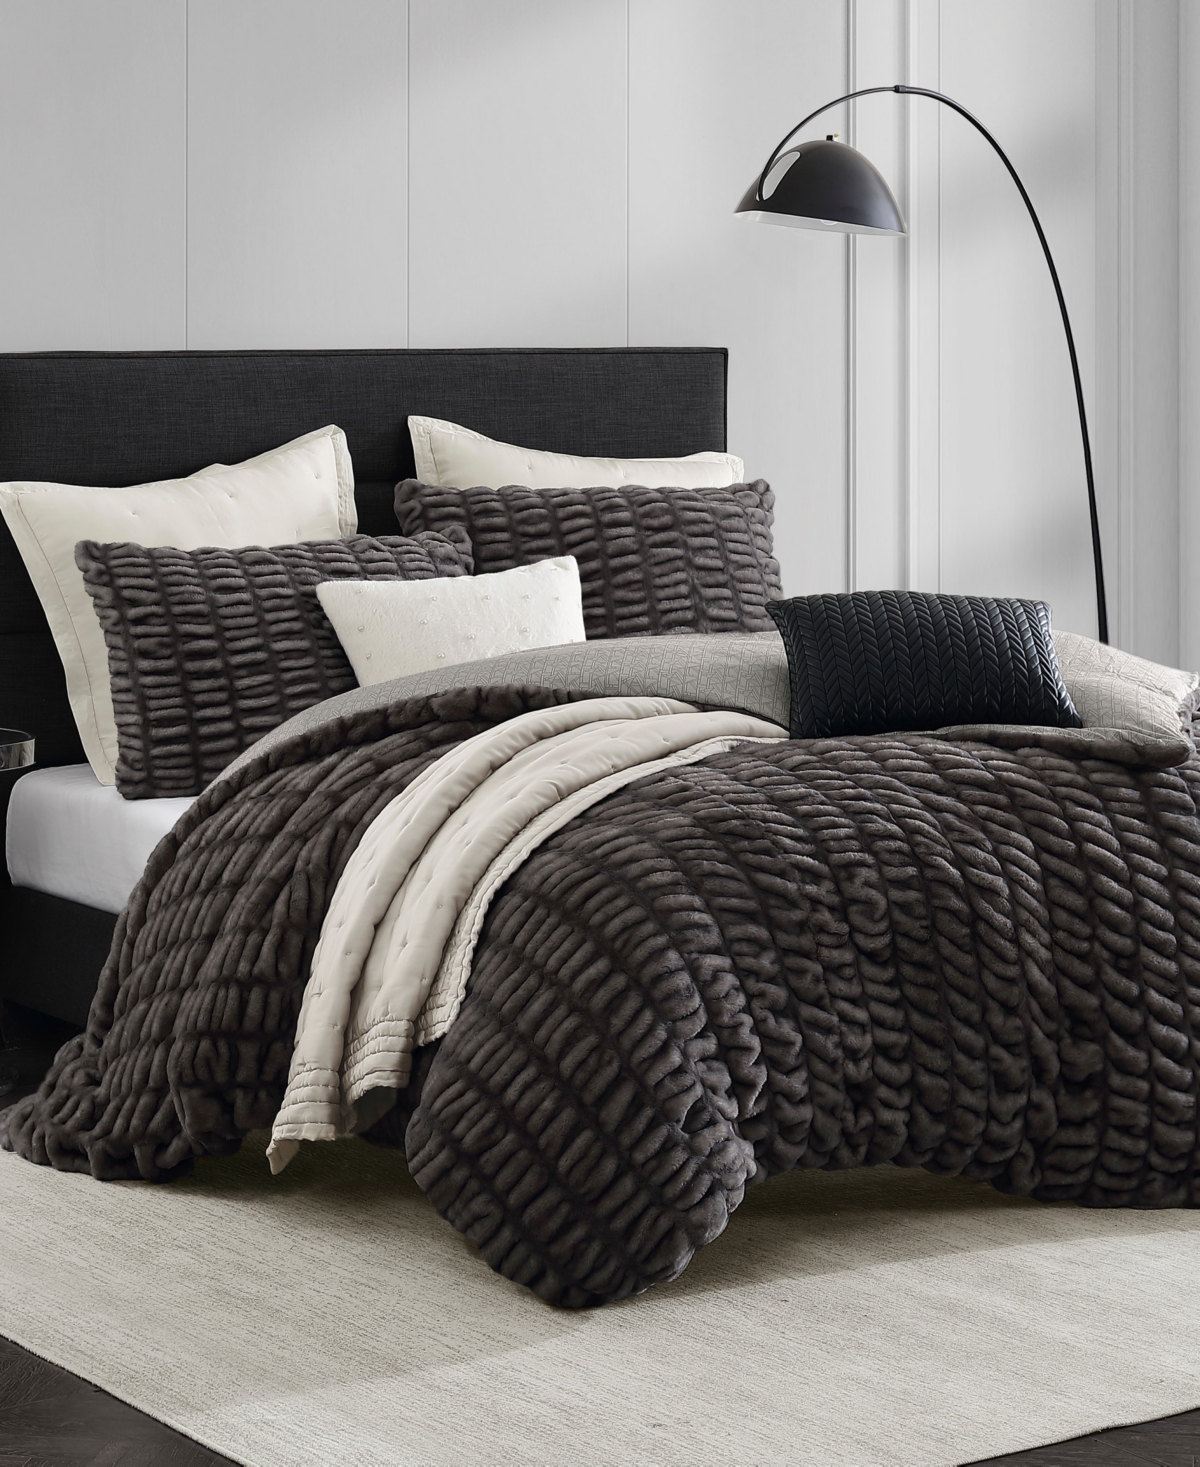 Karl Lagerfeld Ruched Duvet Cover Sets Bedding In Brown